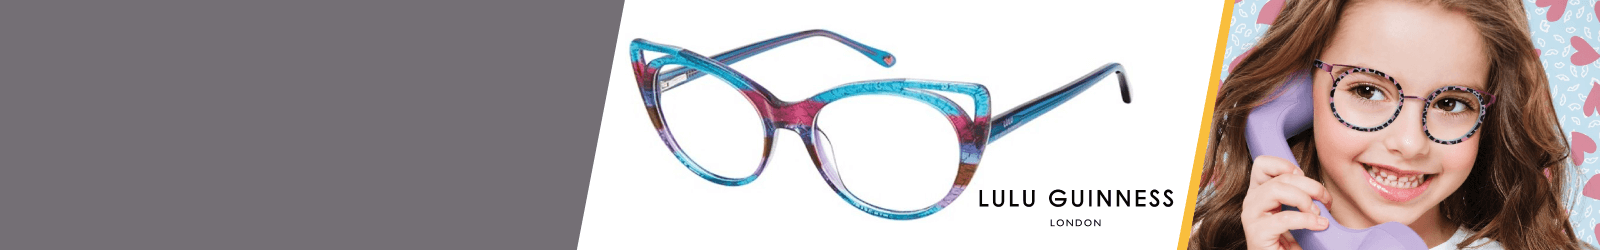 Aqua Lulu Guinness Kids Glasses from 2 to 4-year-old